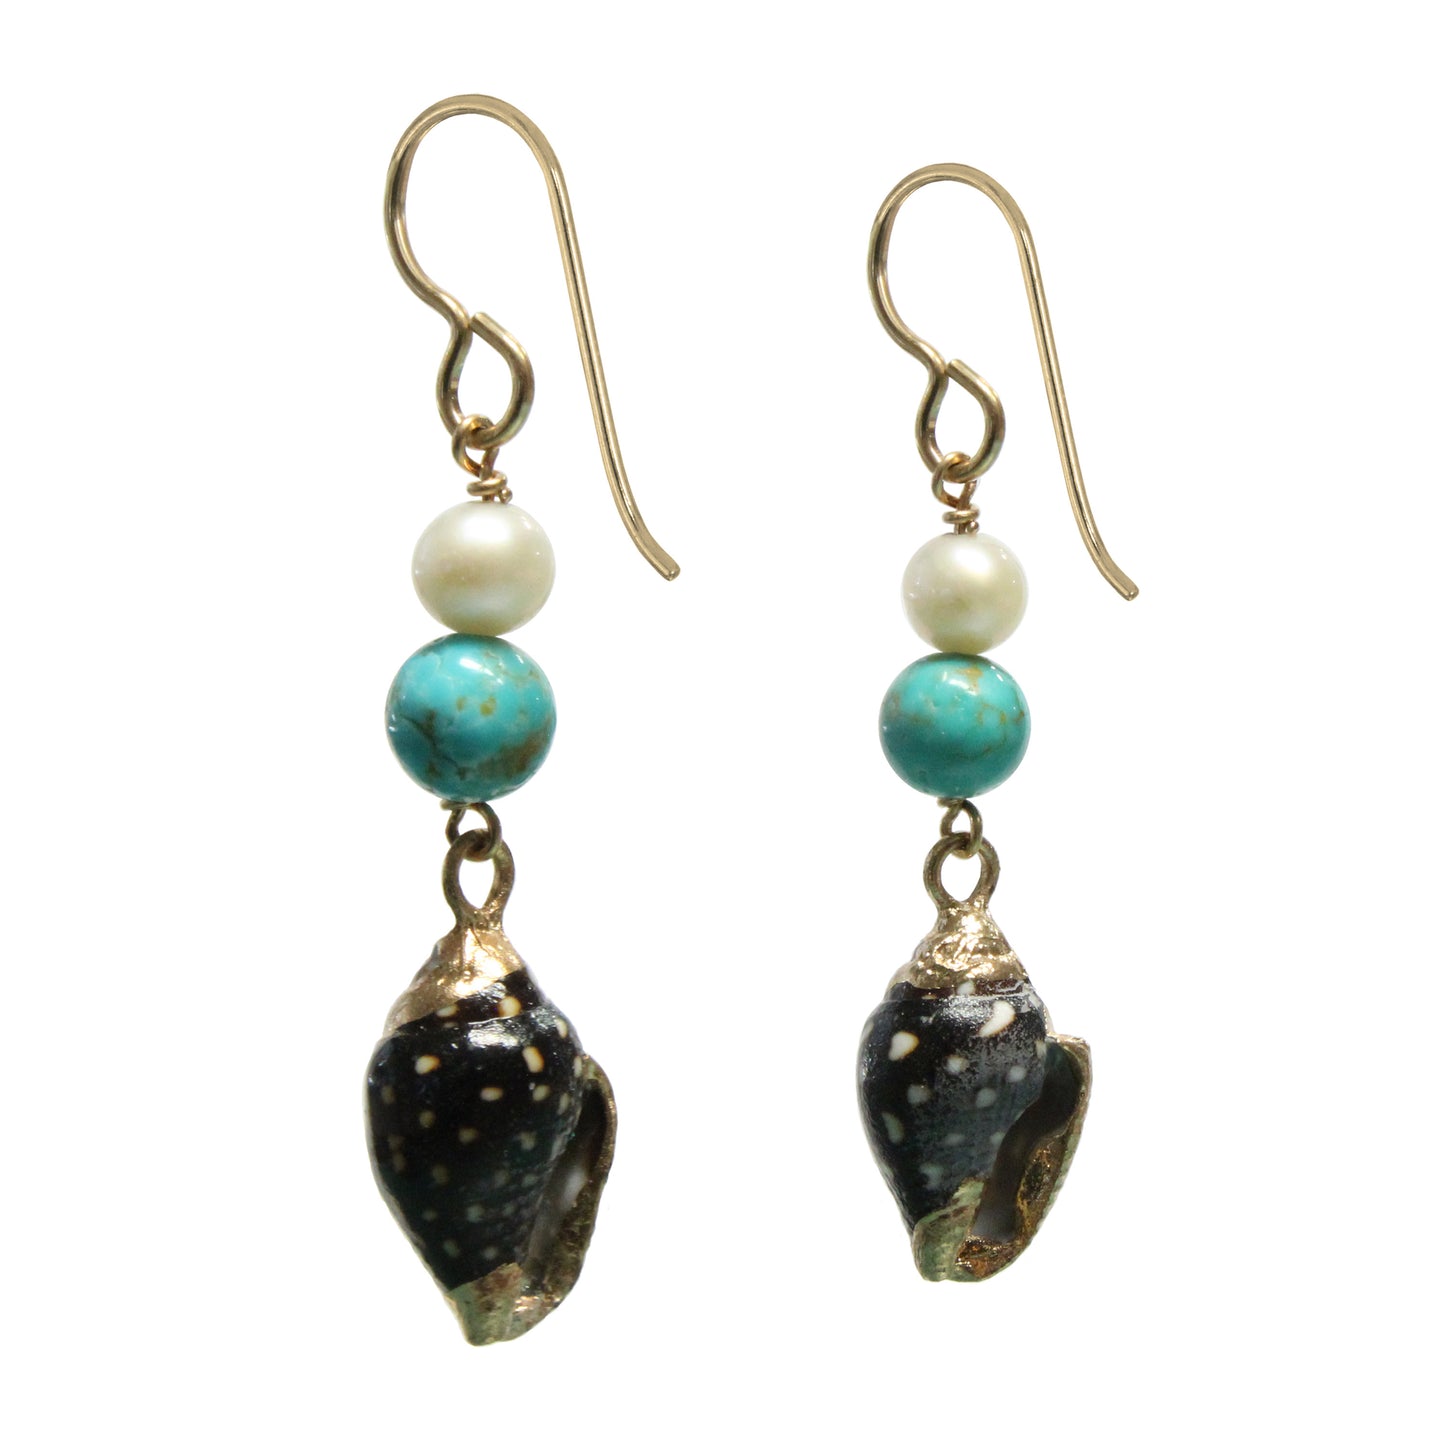 Shell Earrings / 45mm length / #8 Mine turquoise gemstones / gold filled hook earwires